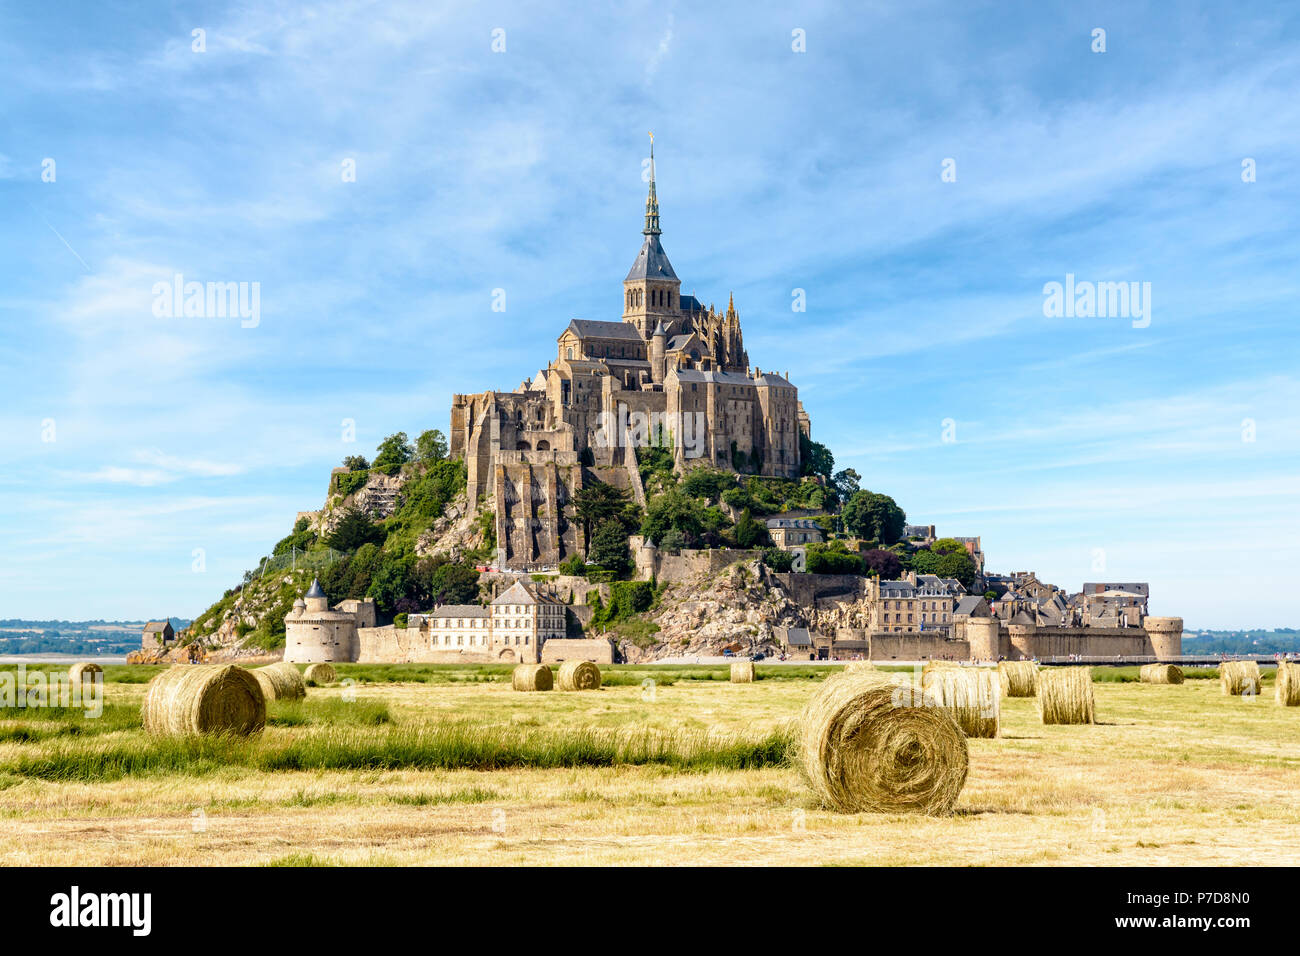 The Mont Saint-Michel tidal island in Normandy, France, with round bales of straw in a field in the foreground under a blue sky with fibrous clouds. Stock Photo